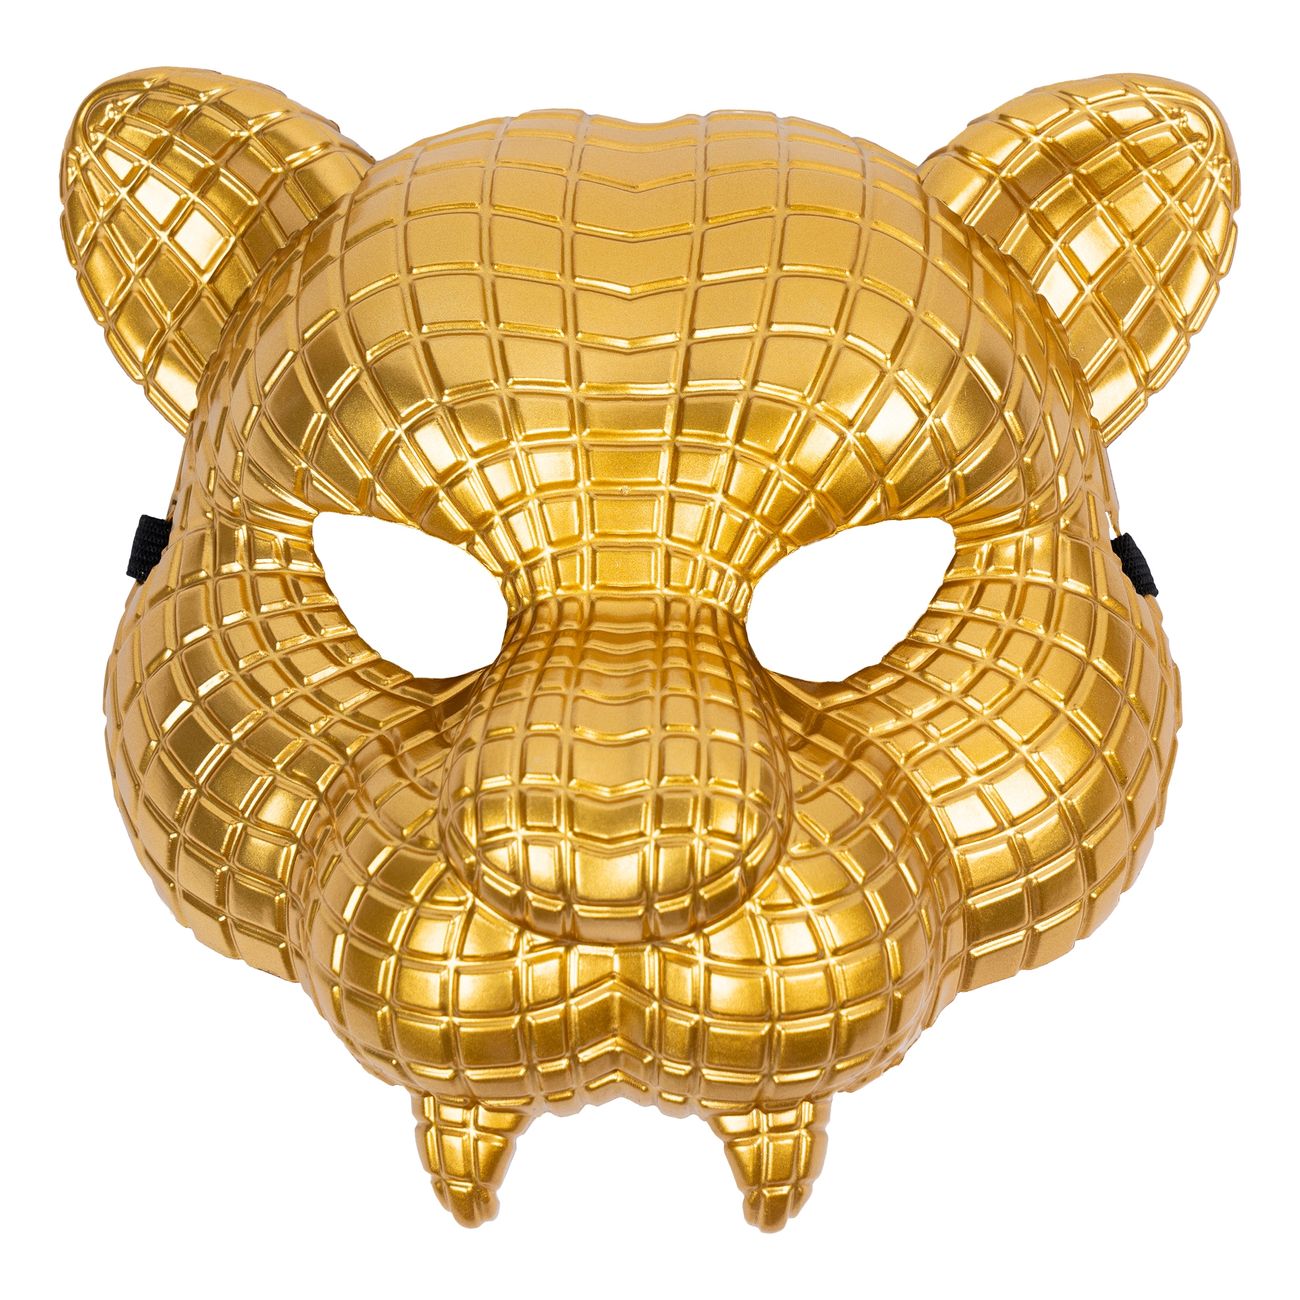 squid-game-lion-mask-88682-1